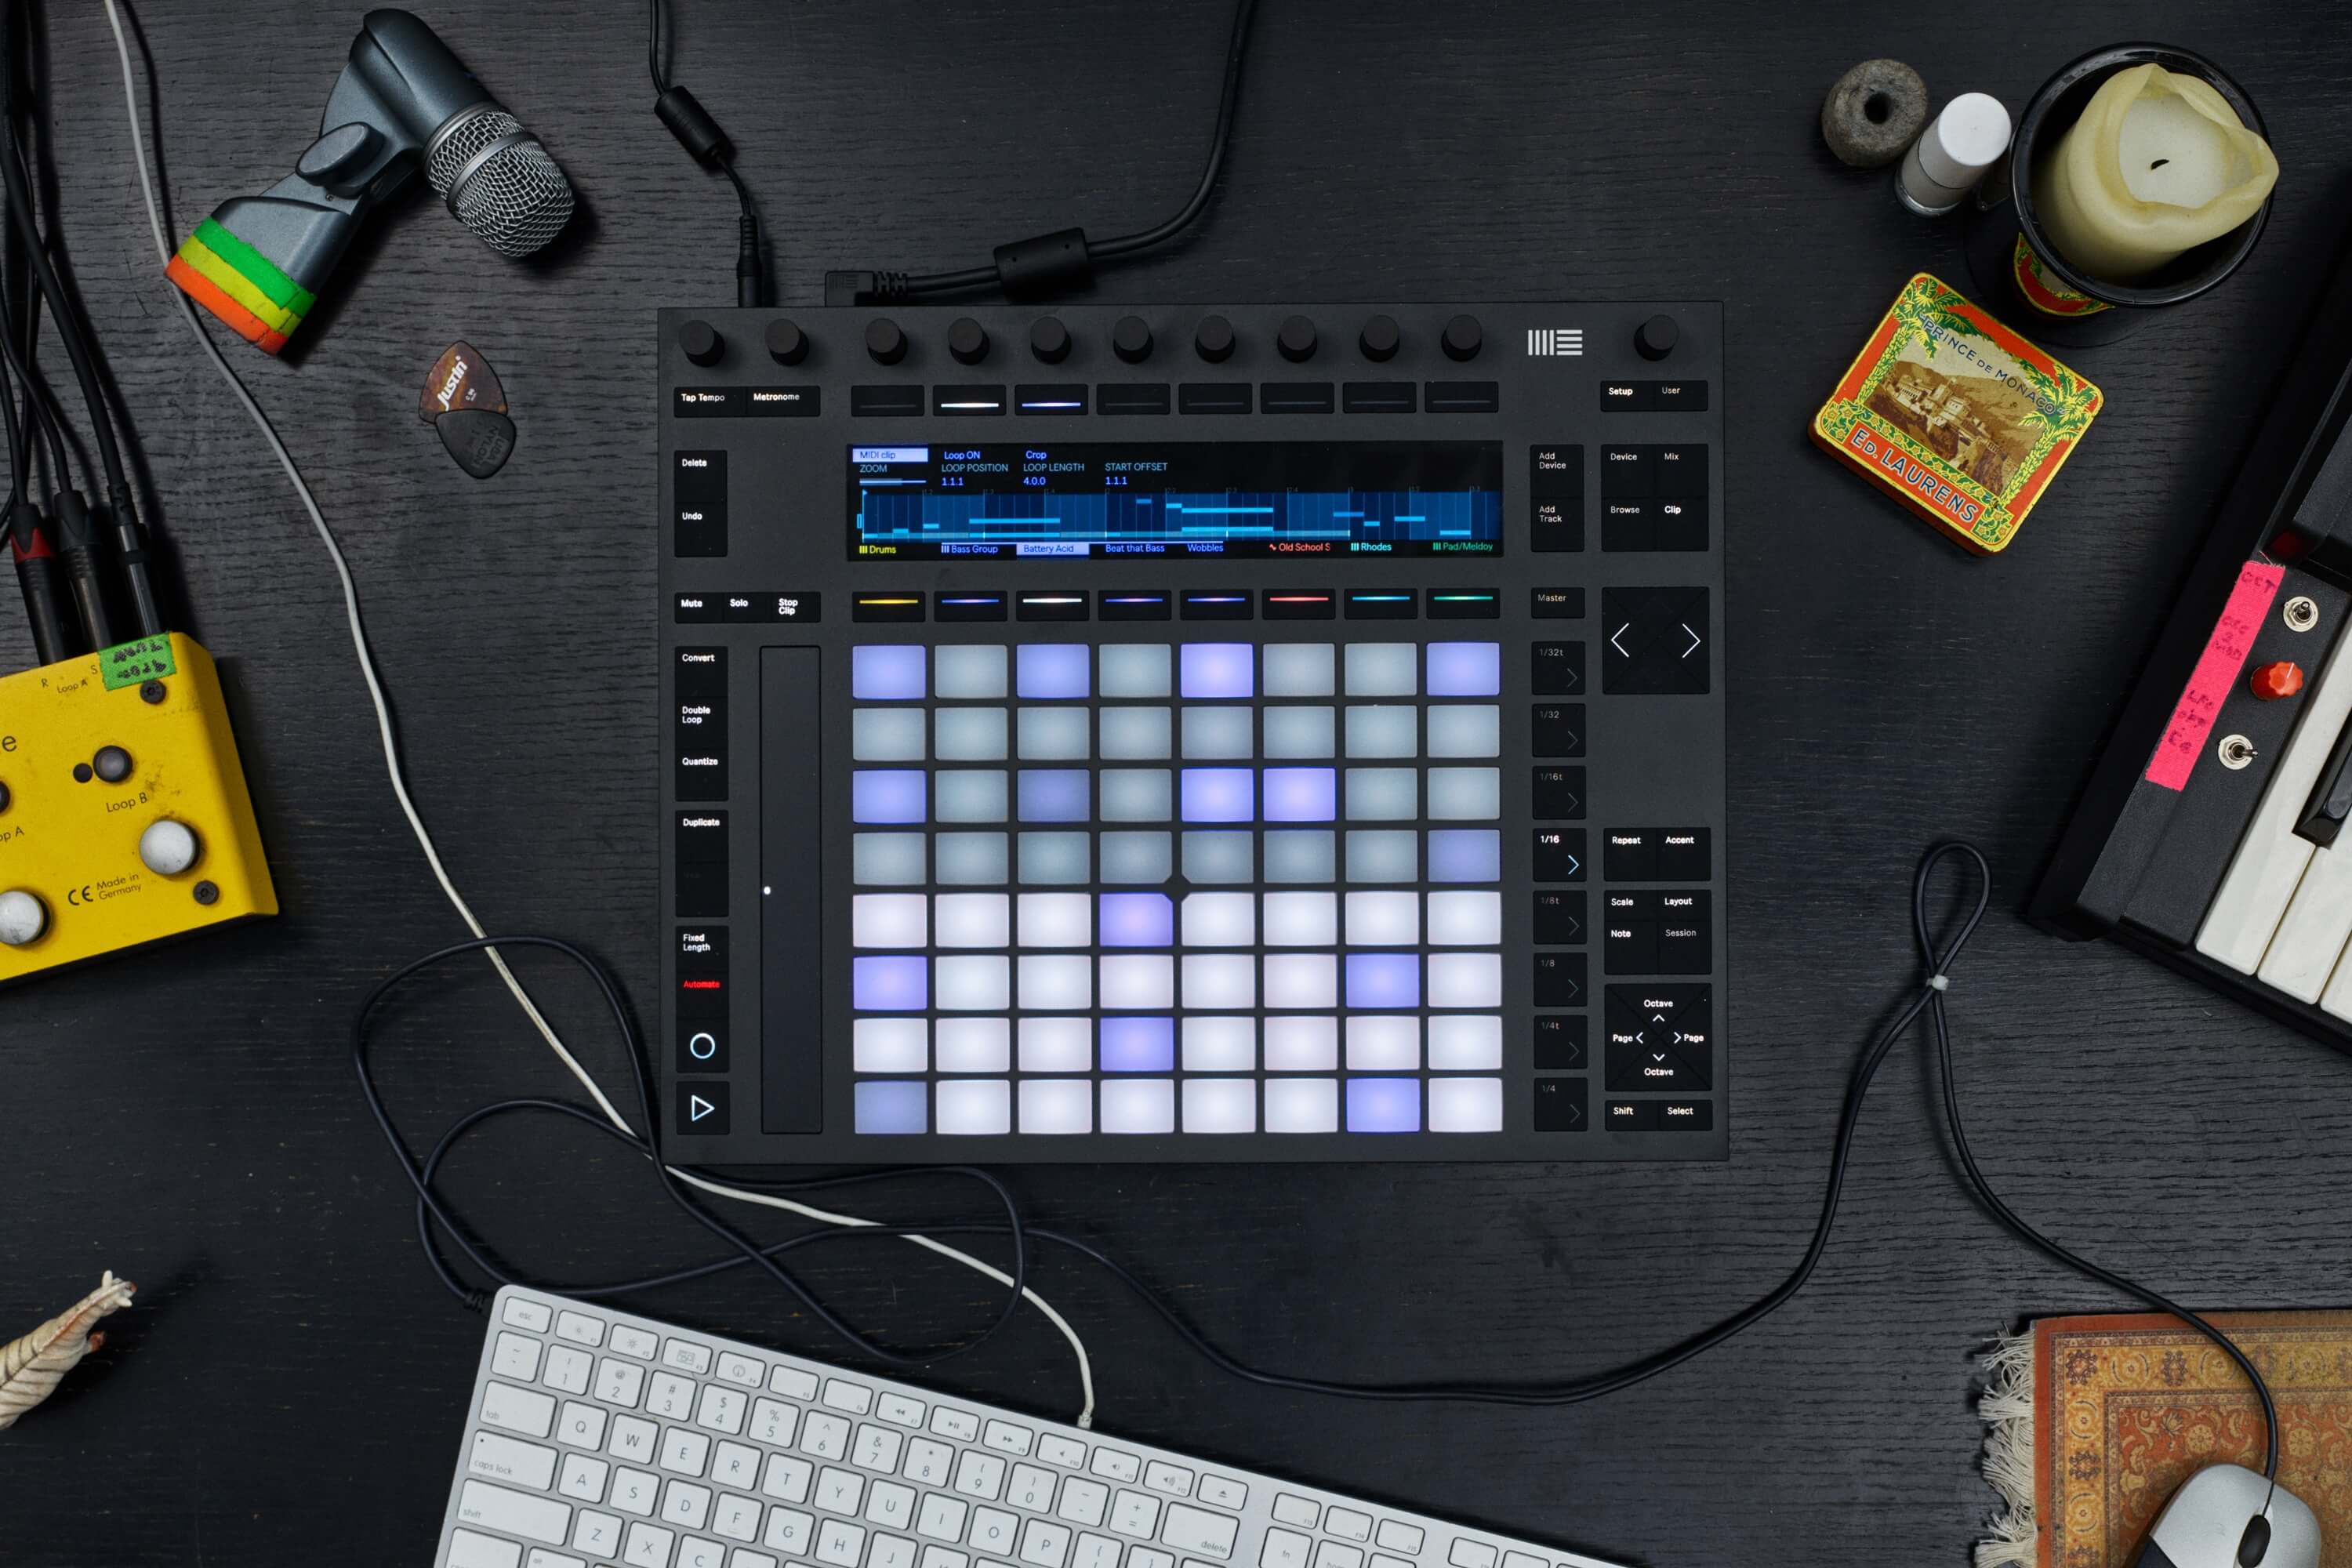 Ableton Live 10 comes with new Wavetable synth, re-designed sound 